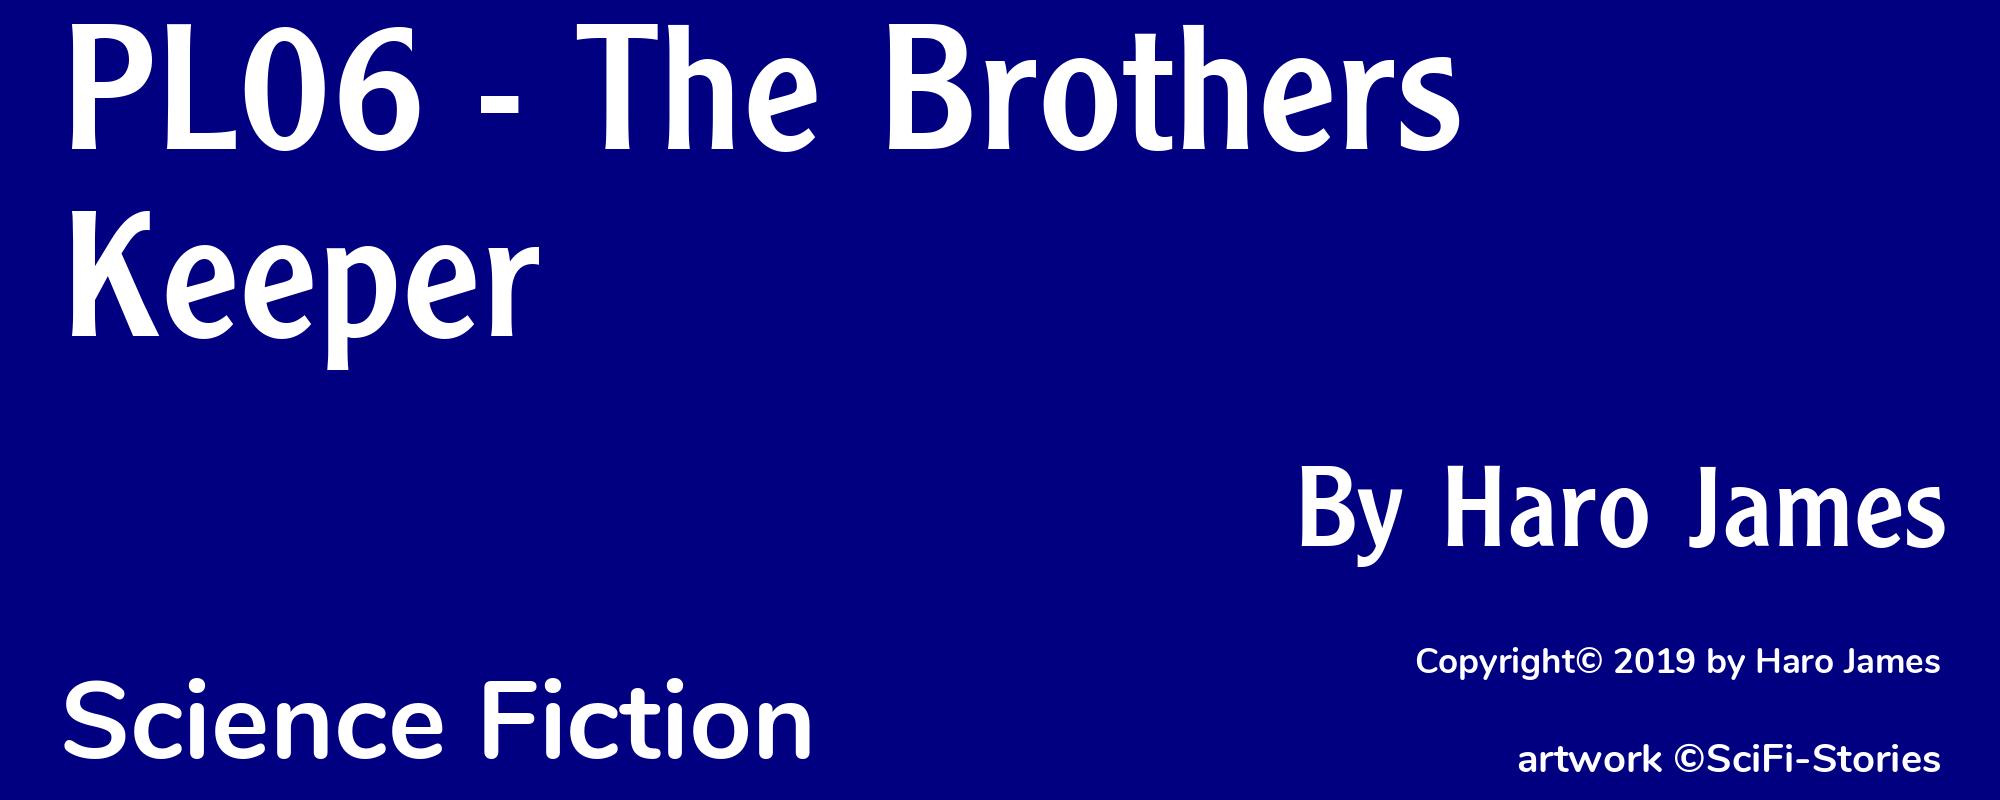 PL06 - The Brothers Keeper - Cover